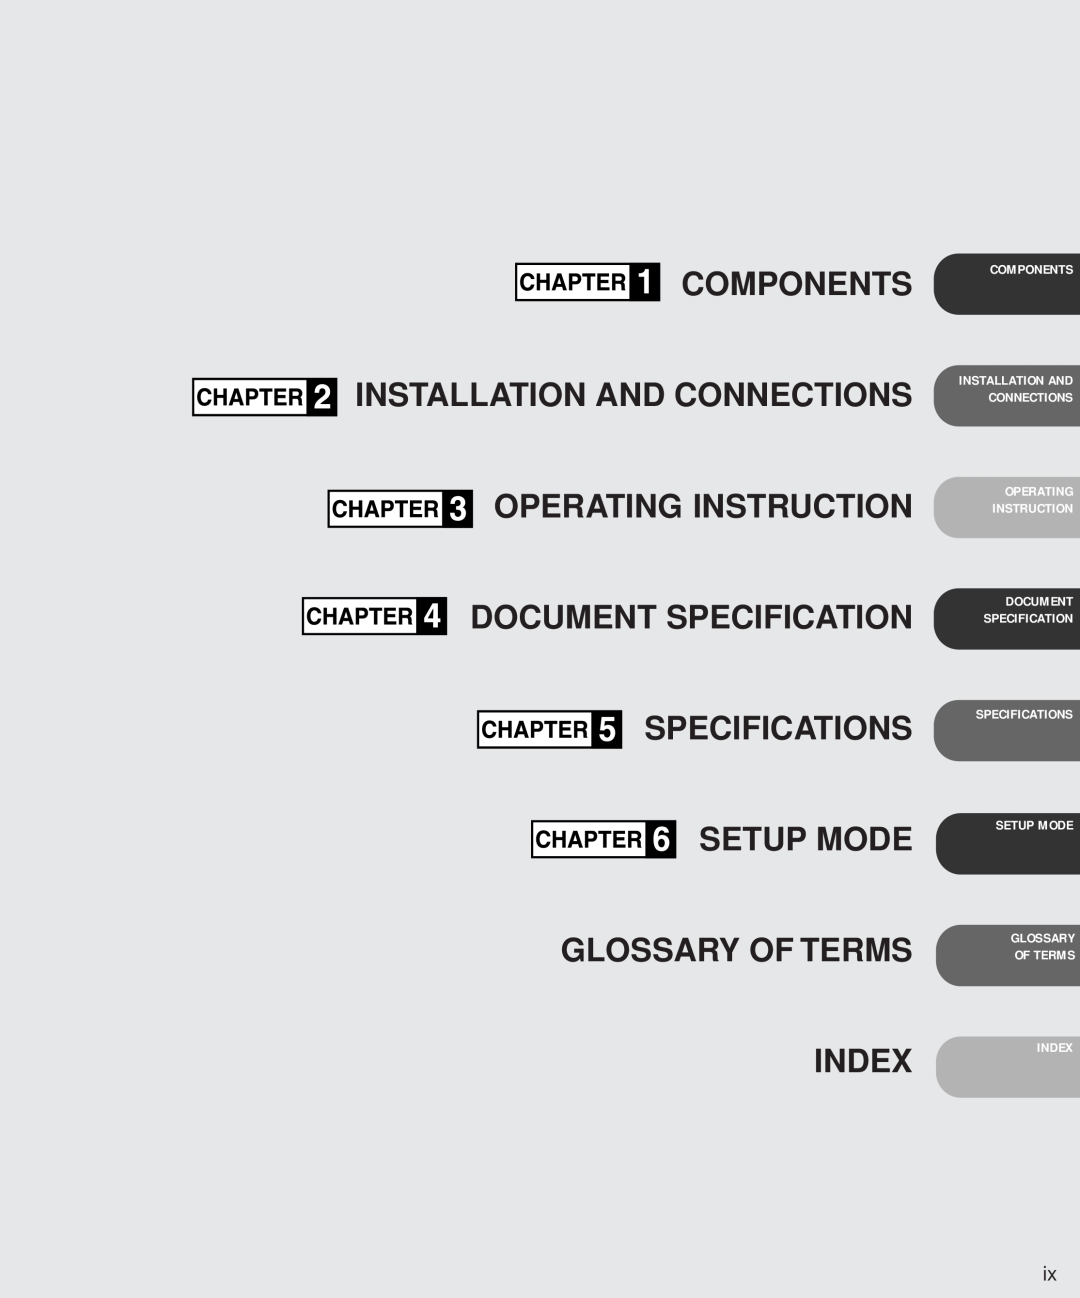 Fujitsu M3097DE Components Installation And Connections Operating Instruction, Index, Of Terms, Document Specification 